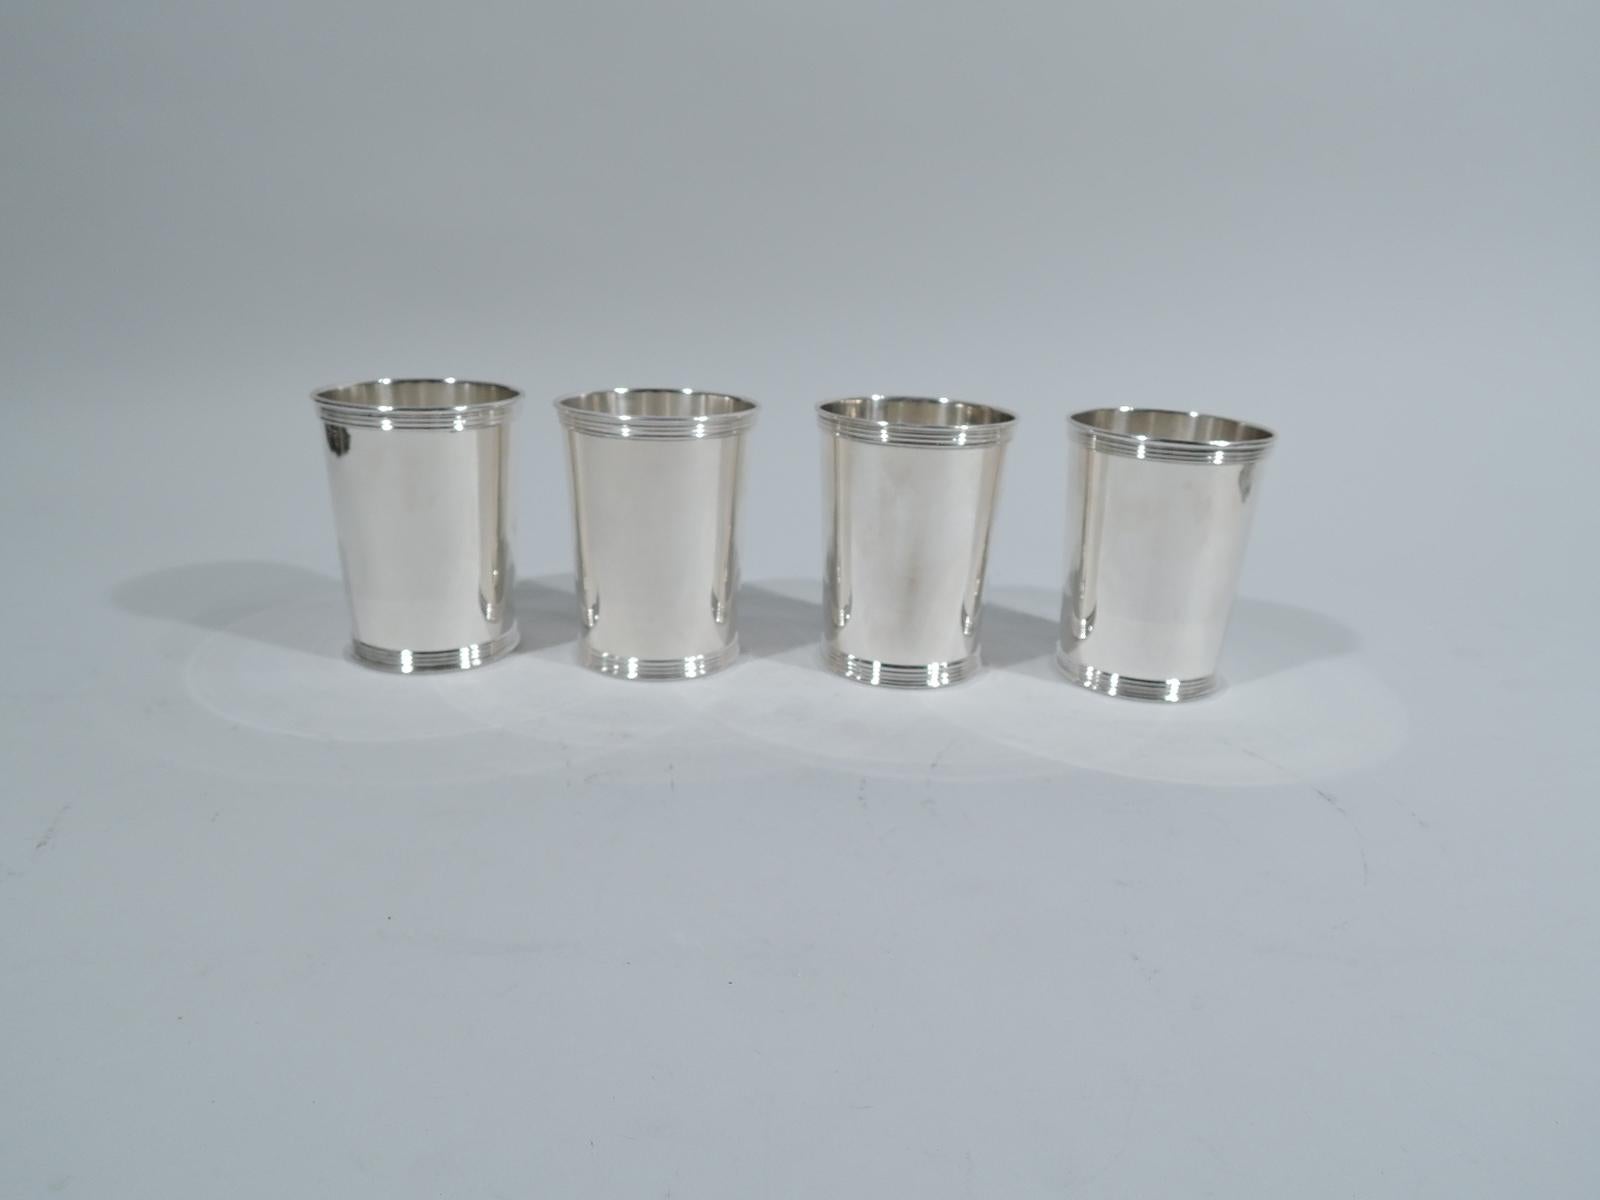 Set of 4 sterling silver mint julep cups. Made by Manchester in Providence. Each: Straight and tapering sides, and reeded rim and foot. Fully marked and numbered 3759. Total weight: 15.5 troy ounces.